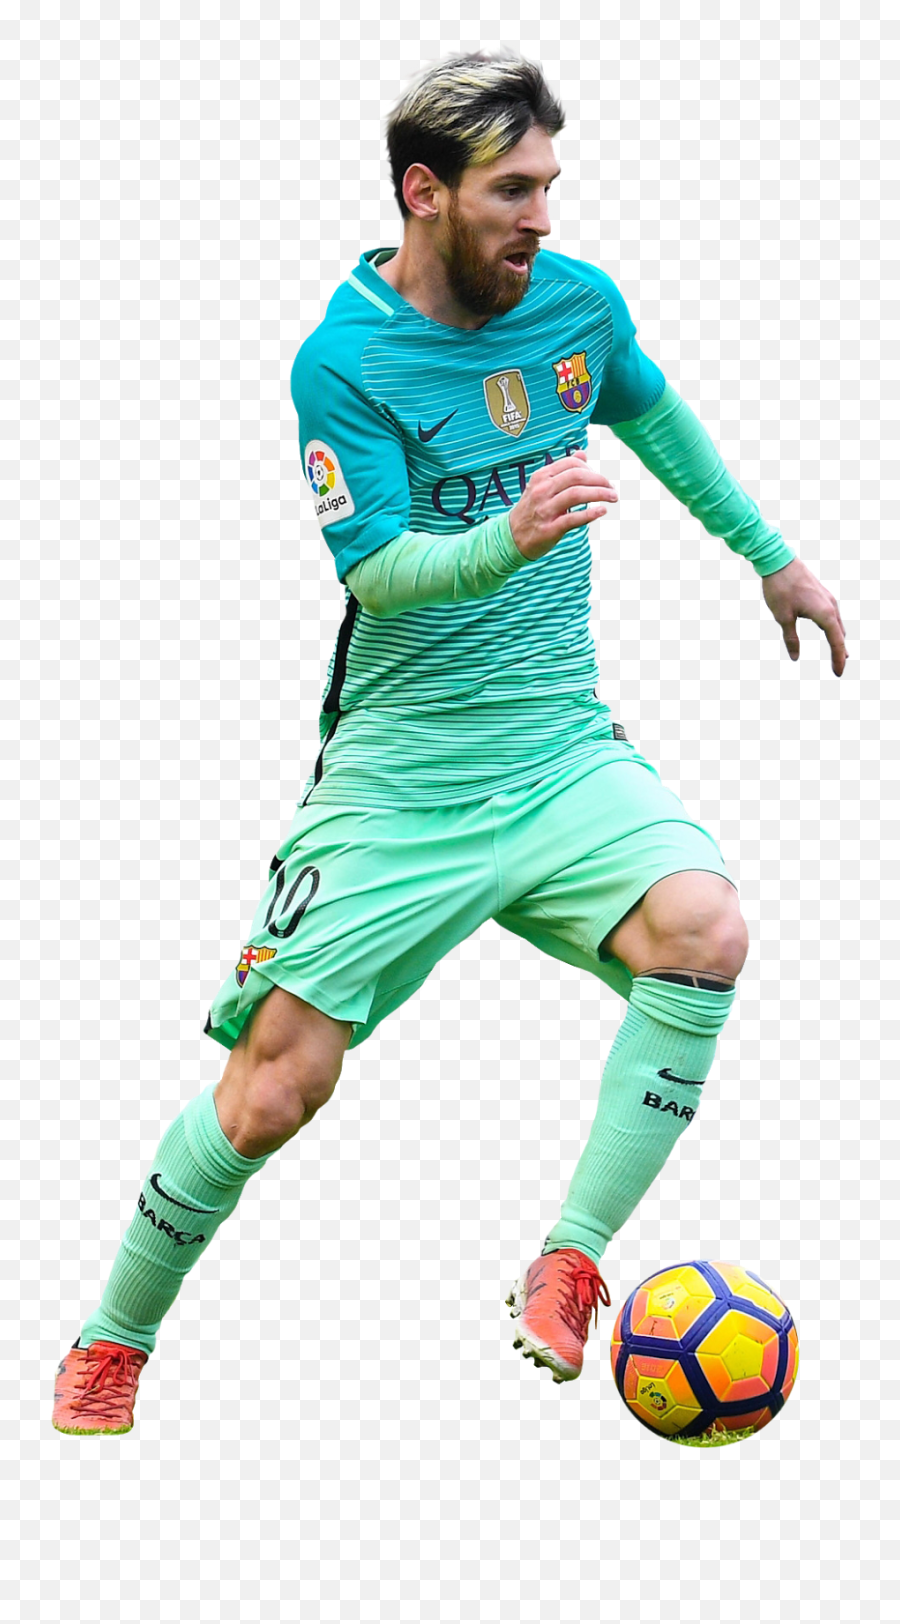 Download Lionel Messi Png Image With No Background - Pngkeycom Fondo De Messi Png,Lionel Messi Png